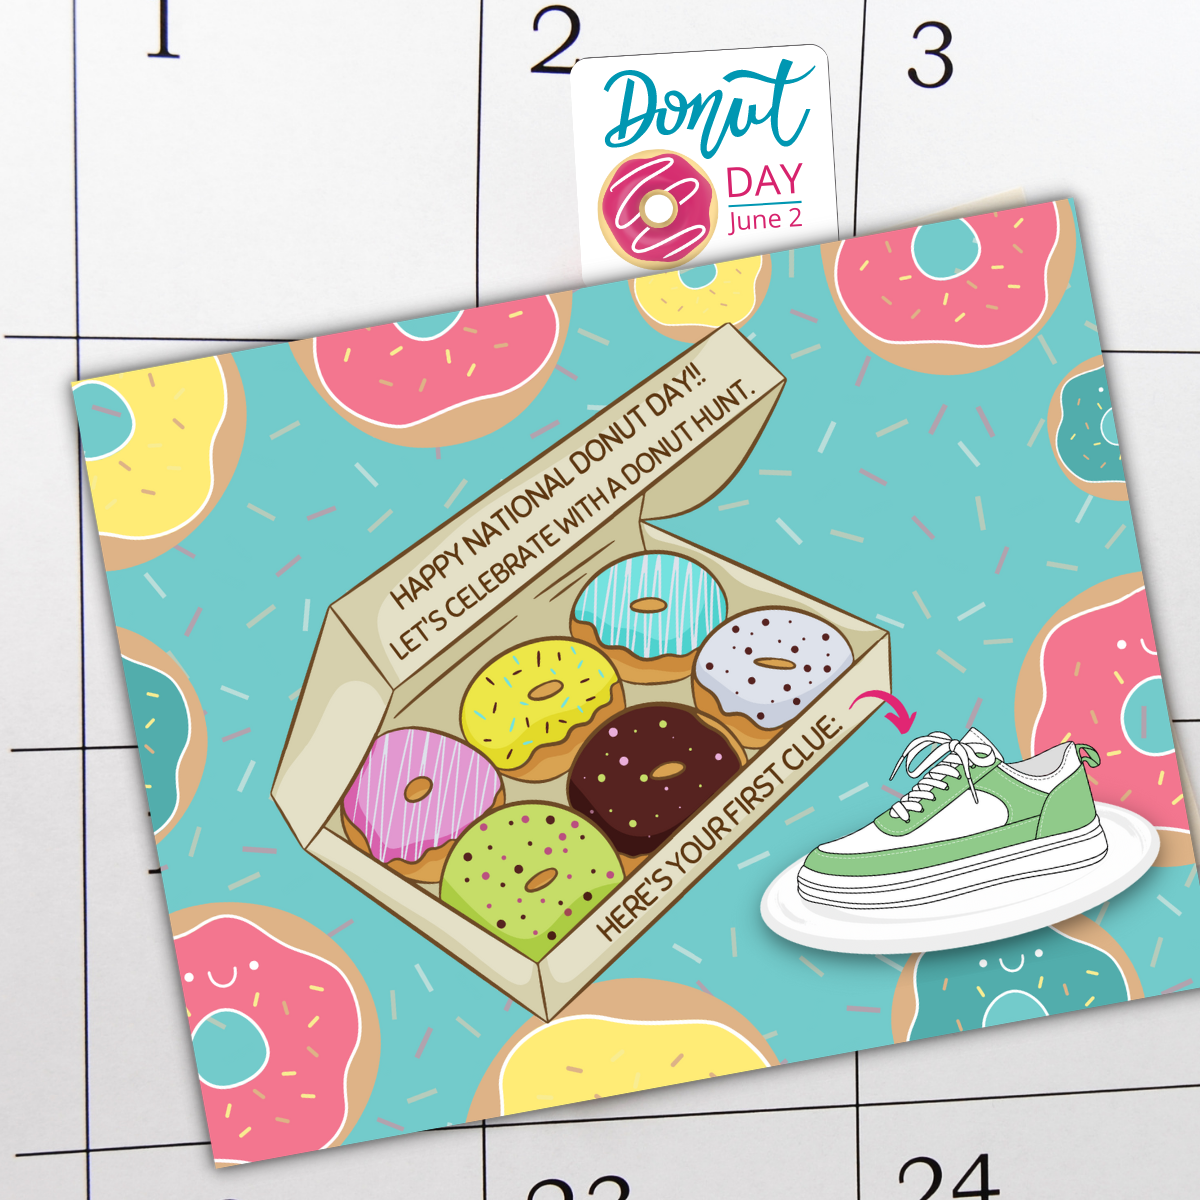 The first clue card for a National Donut Day treasure hunt sits on top a calendar showing the holiday marked on June 2nd.